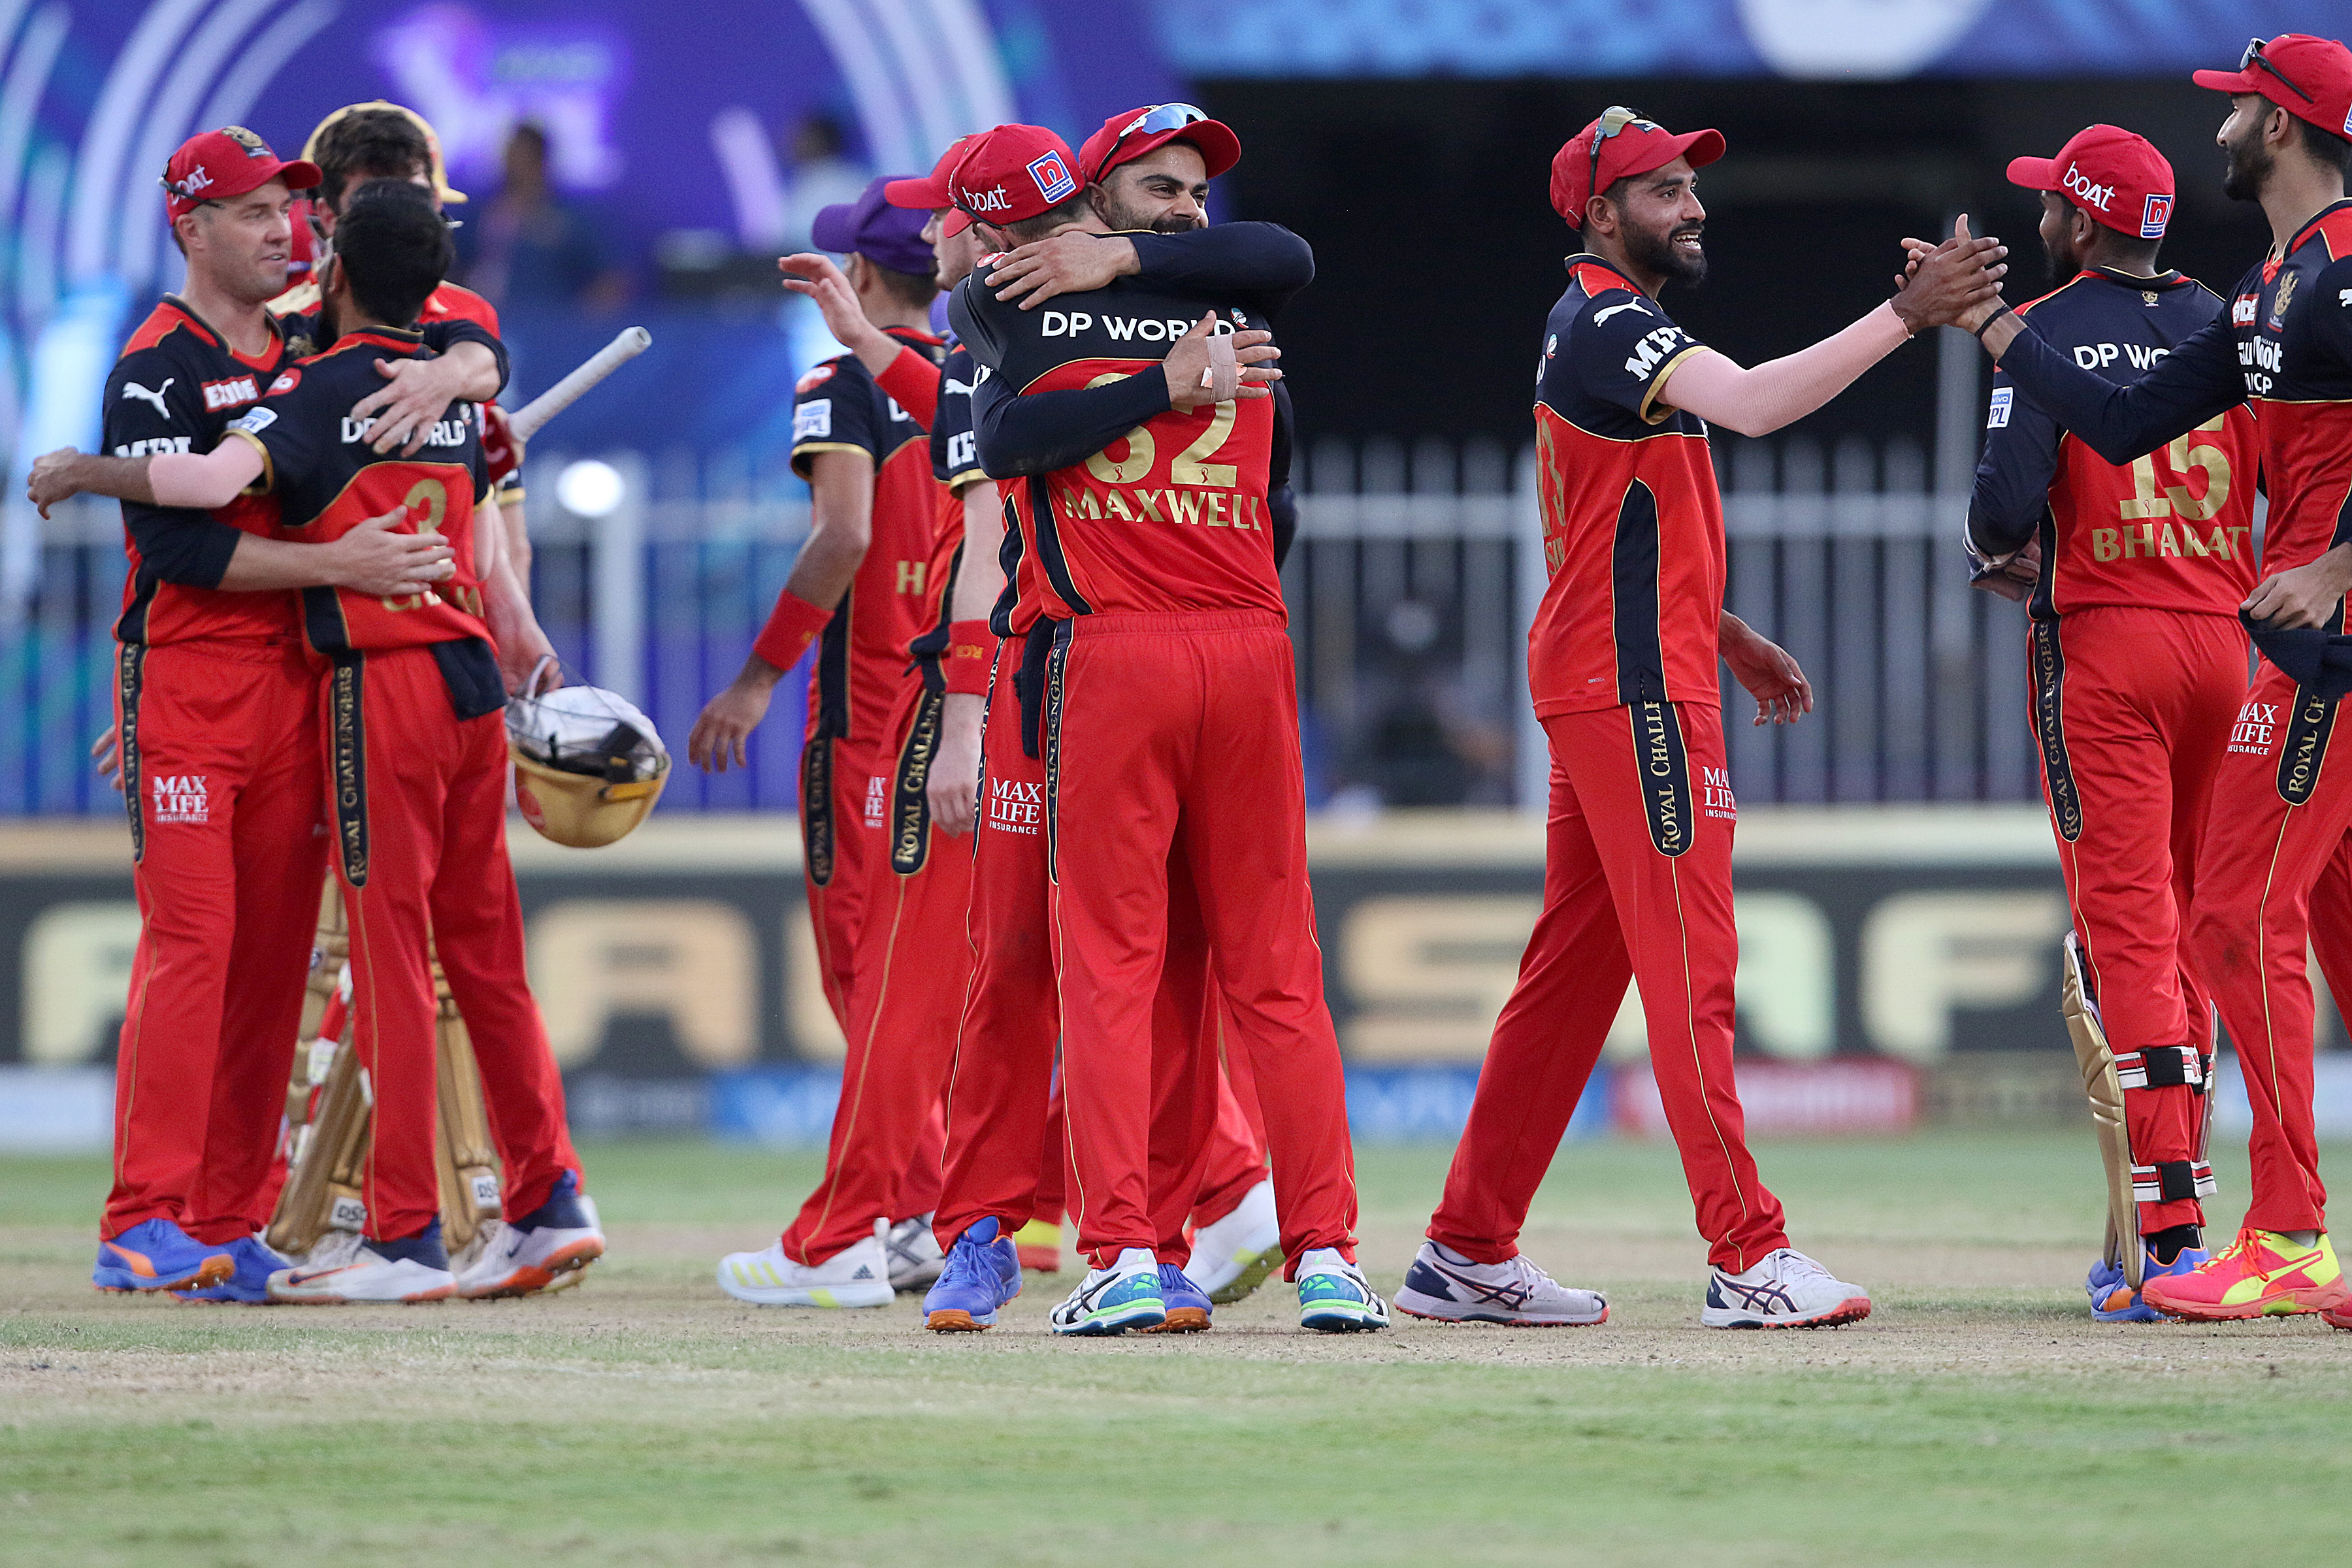 IPL 2021 | RCB might lift their first trophy this season, says Lance Klusener